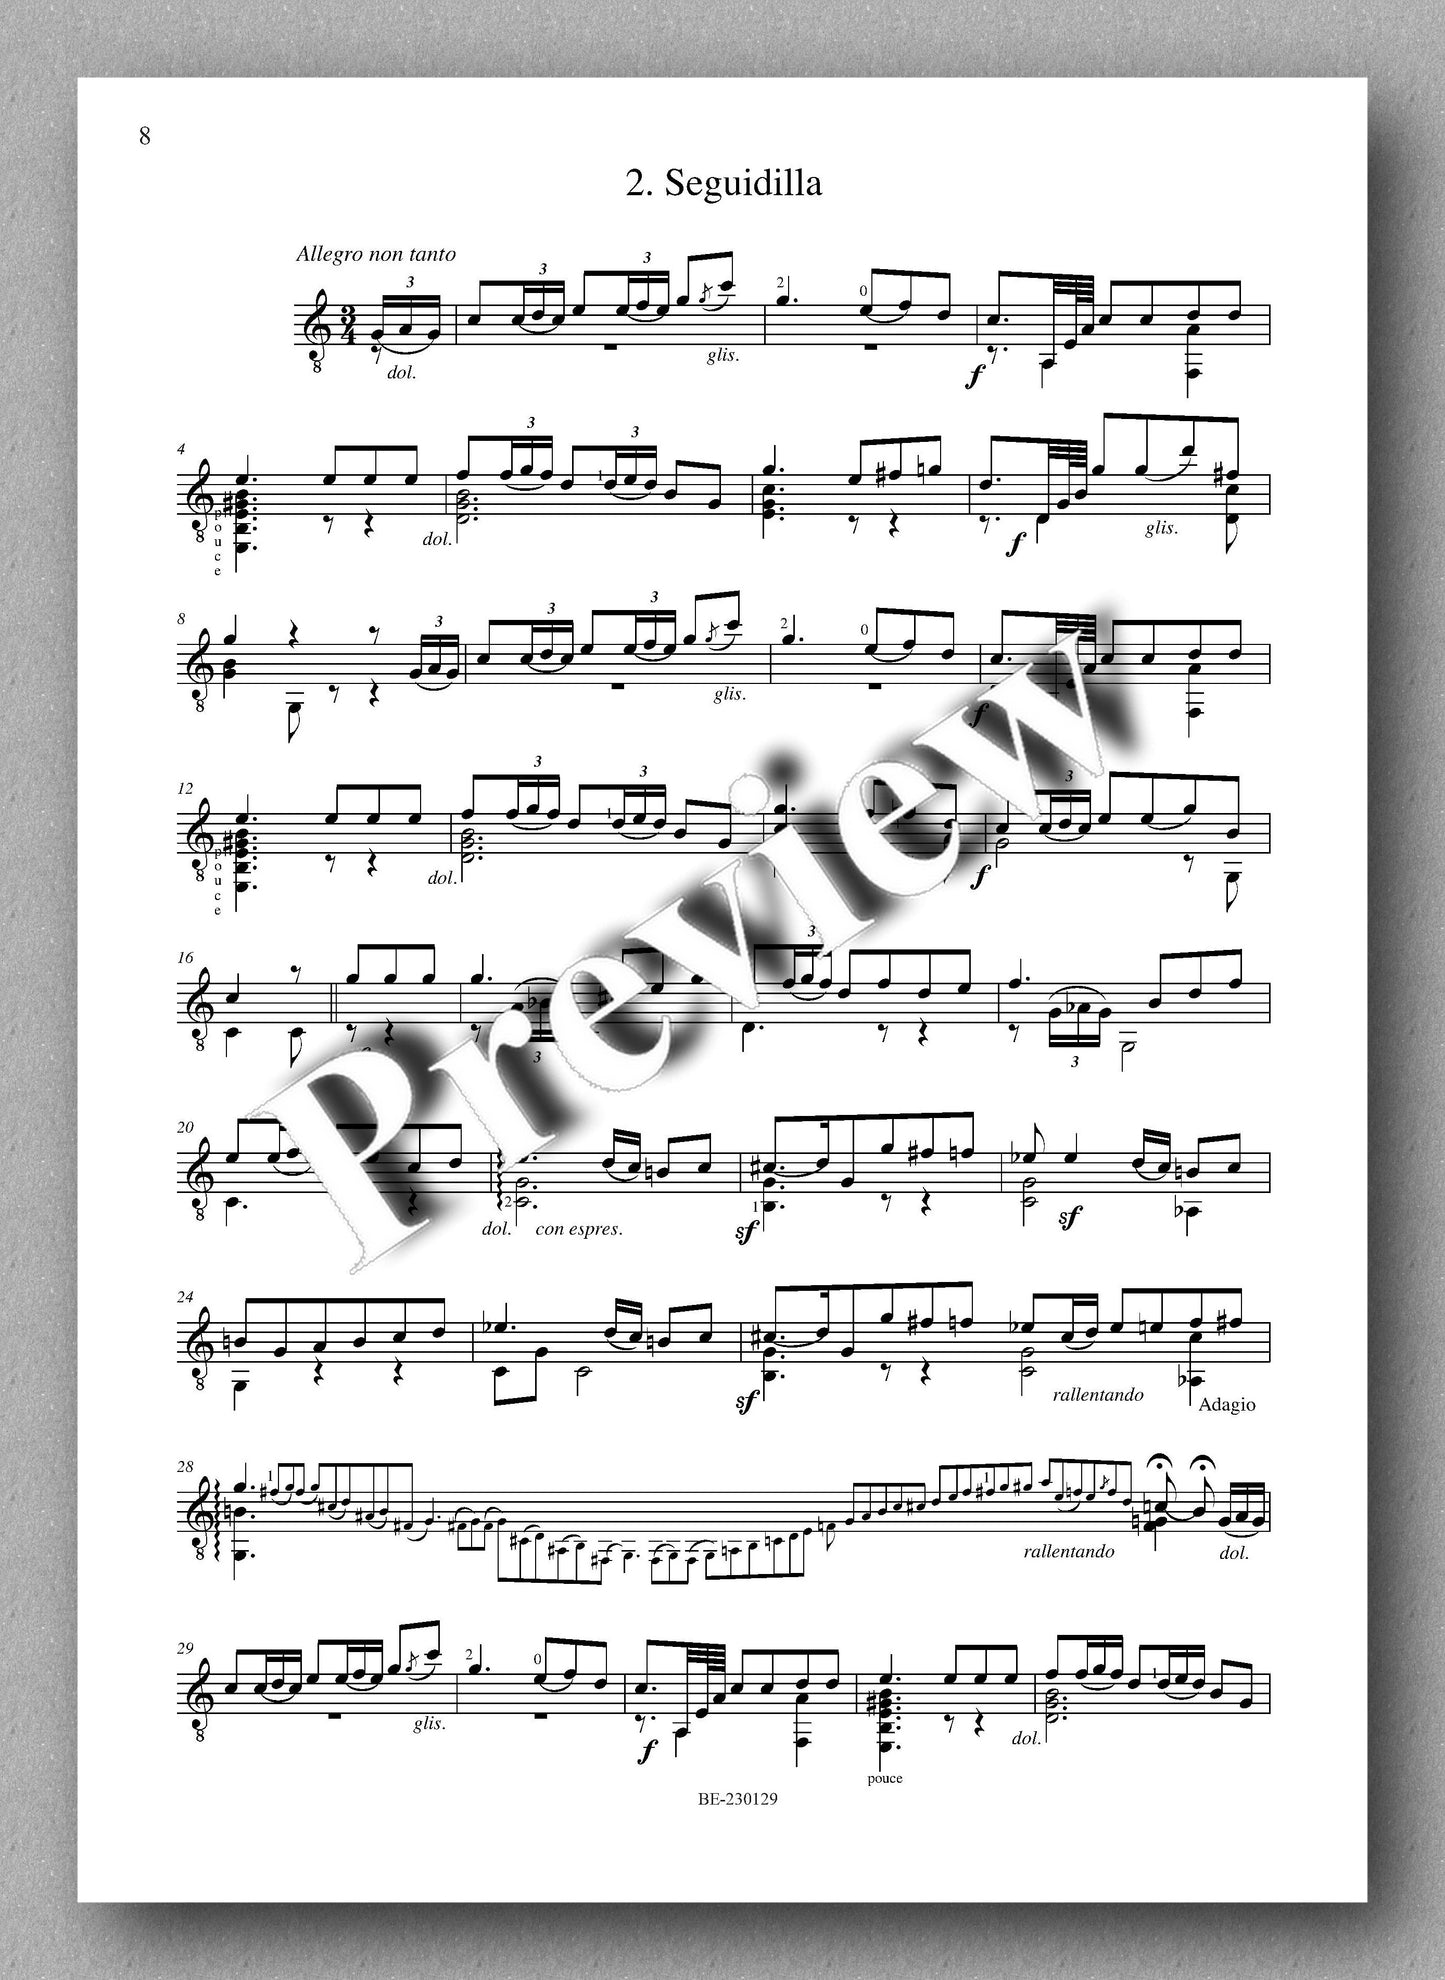 Molino, Collected Works for Guitar Solo, Vol. 41 - preview of the music score 2